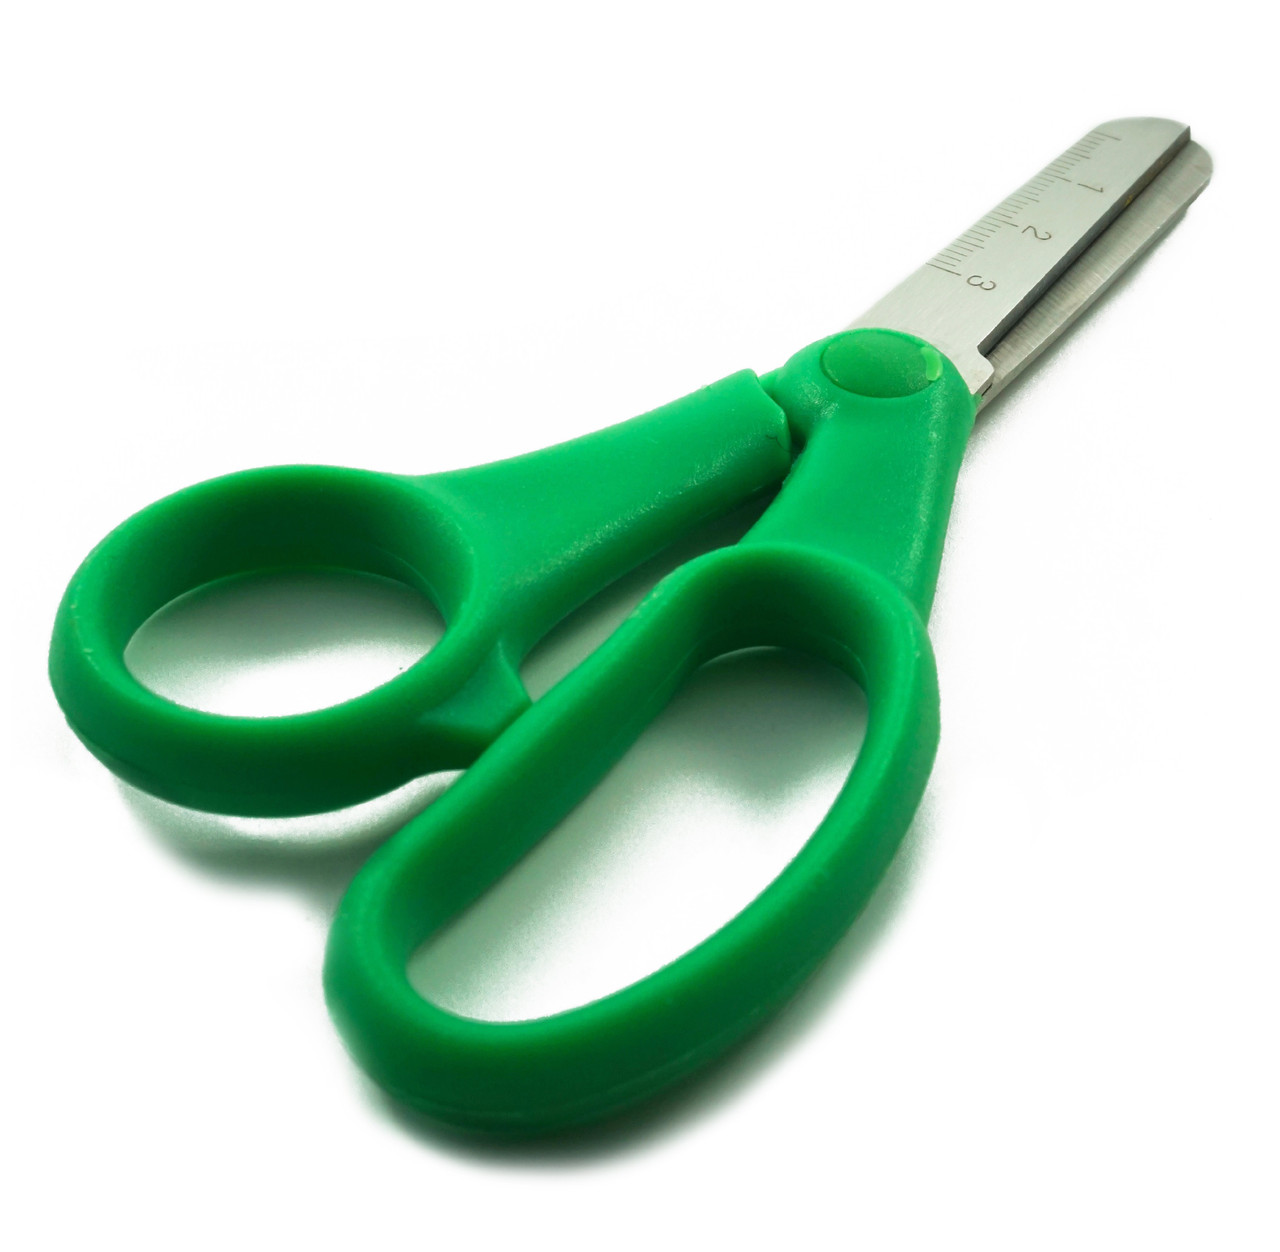 Wholesale food safe scissors for Precision and Safety in the